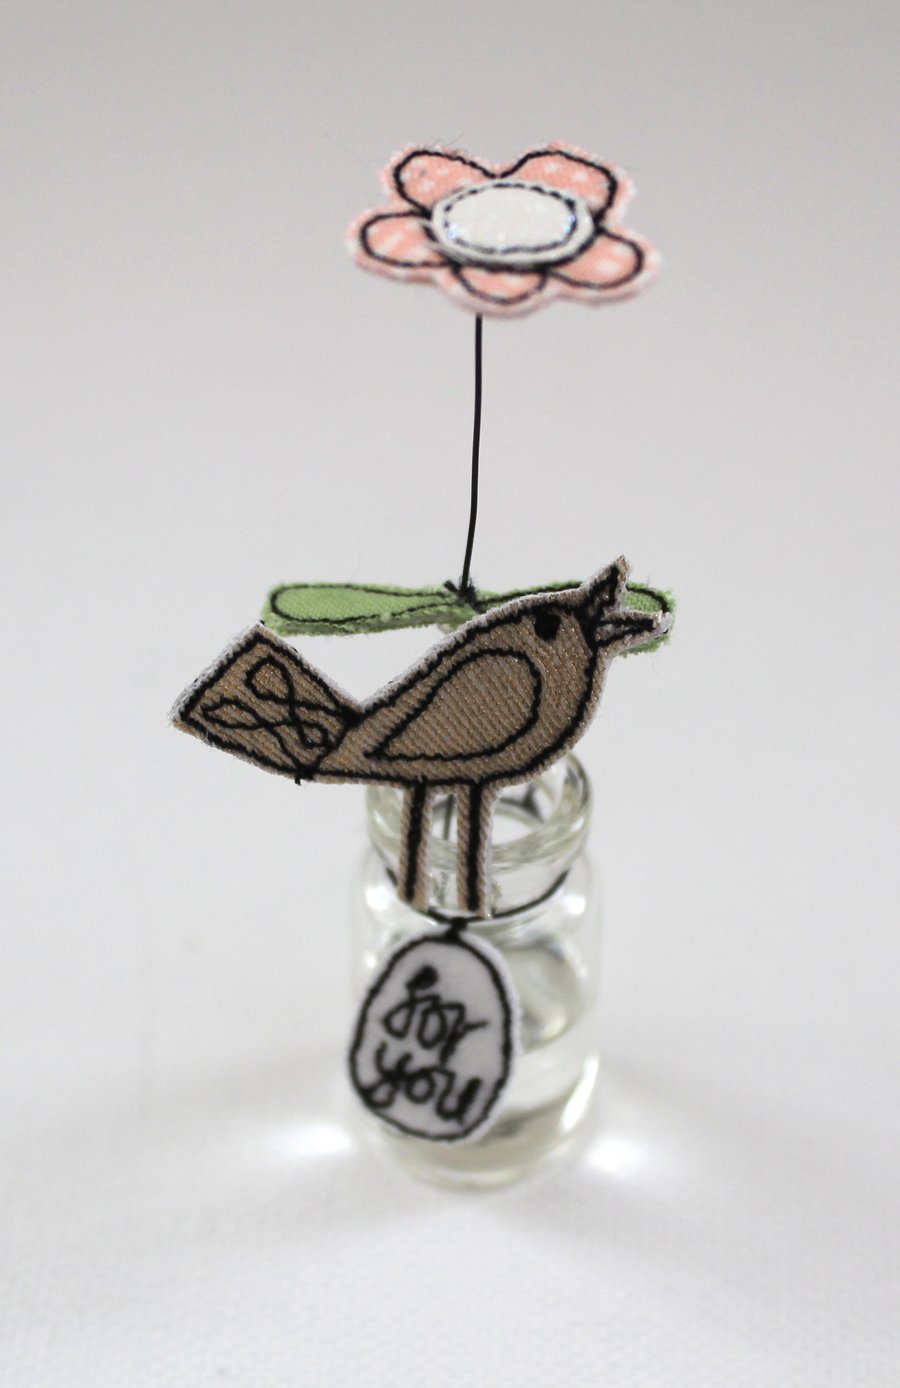 'For you' Flower in a Bottle with a Birdie